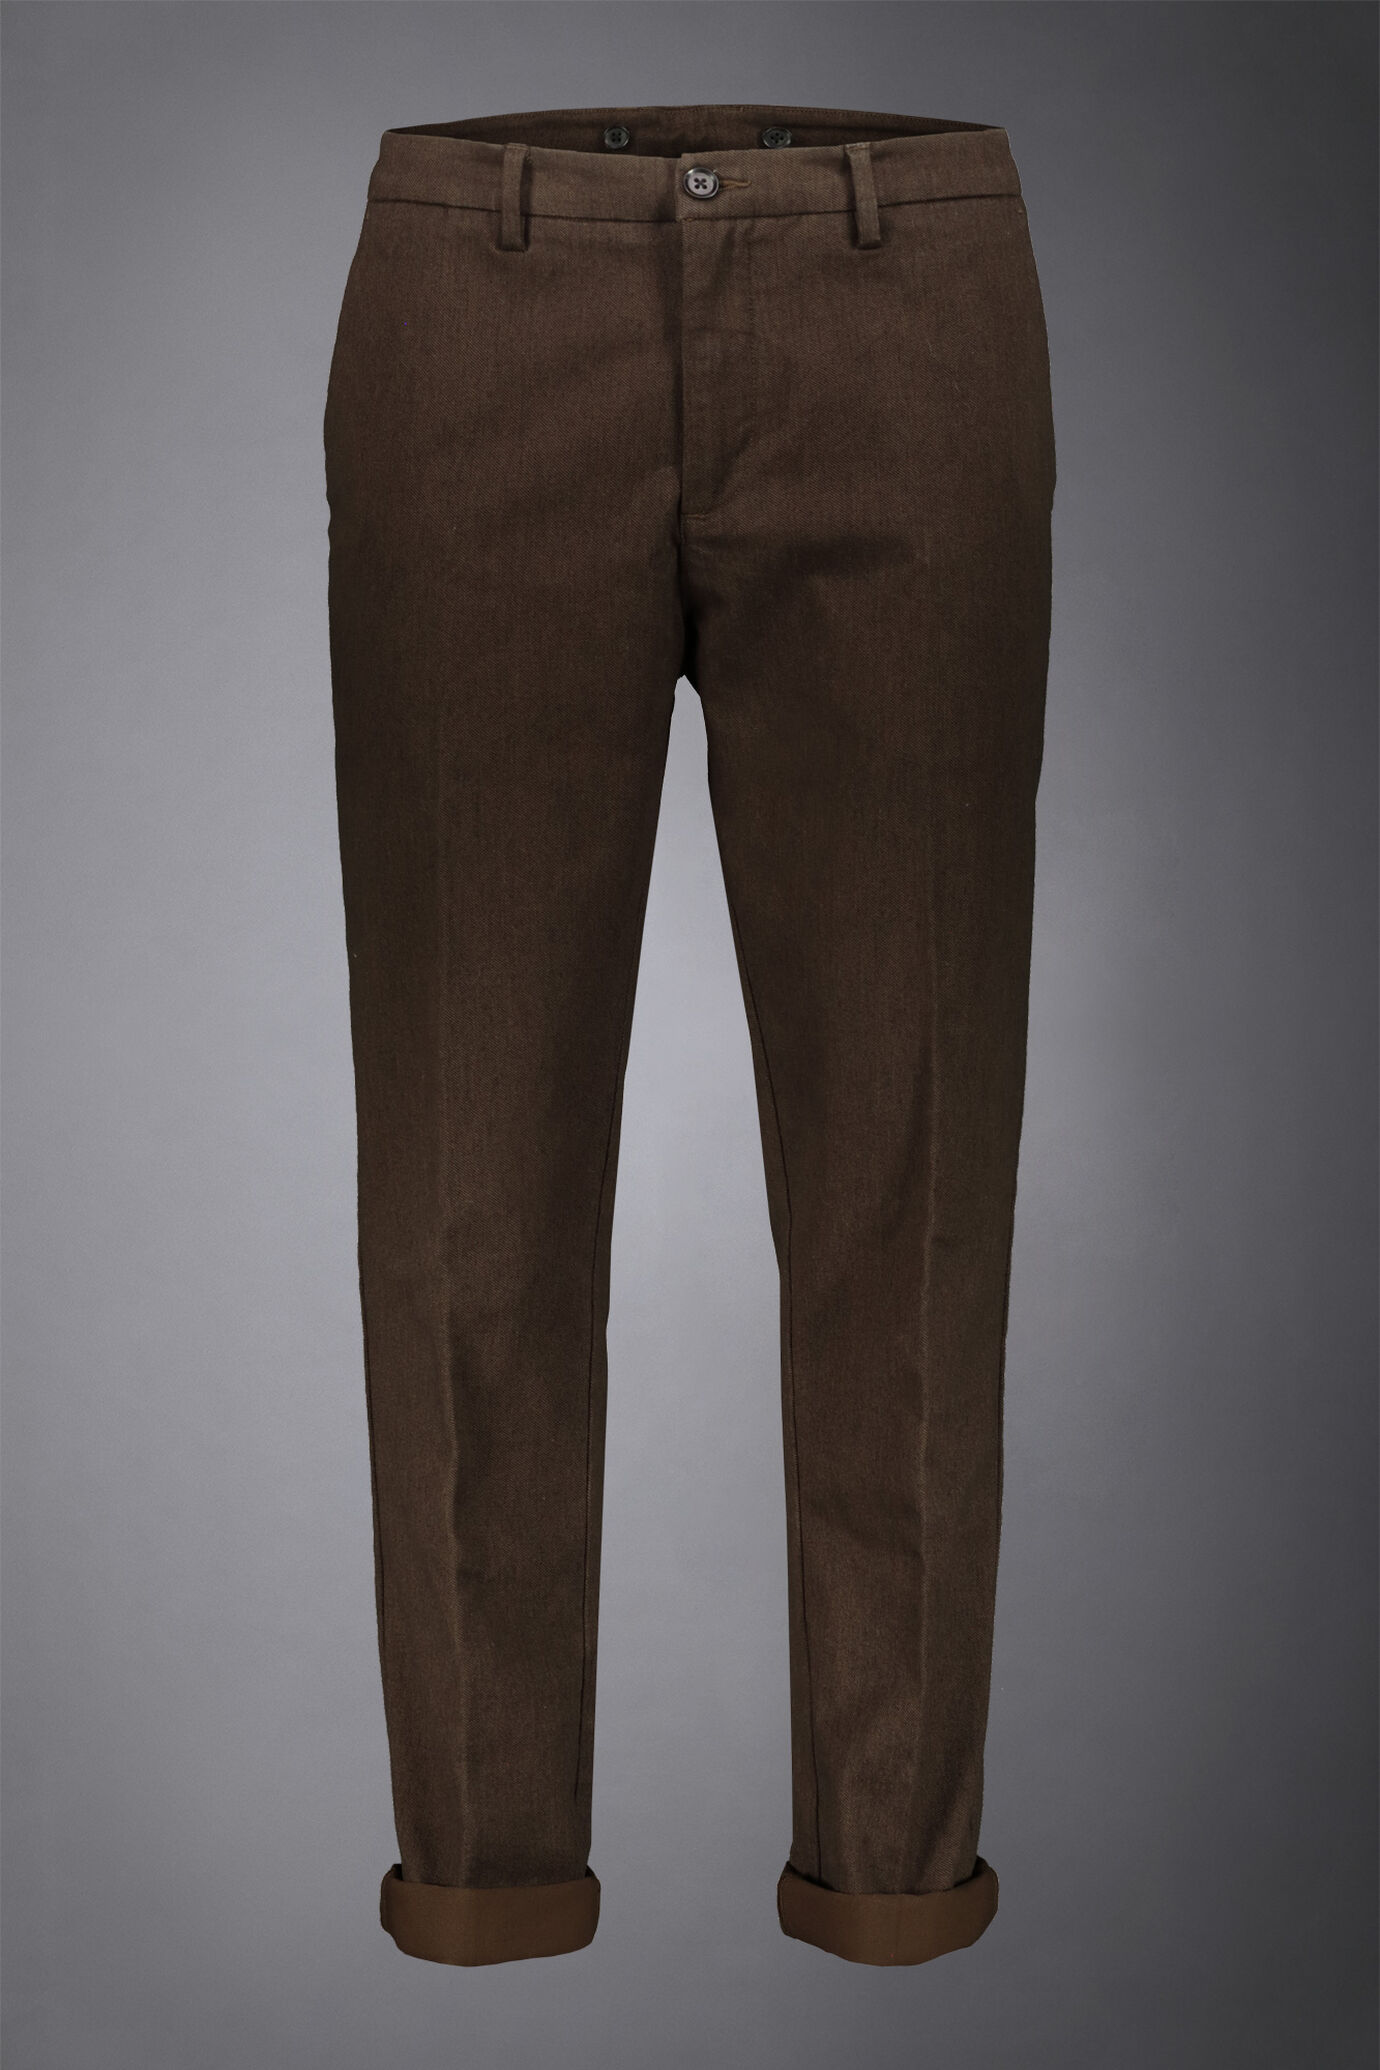 Men's chino pants cotton fabric hand wool cavalry twill image number 4